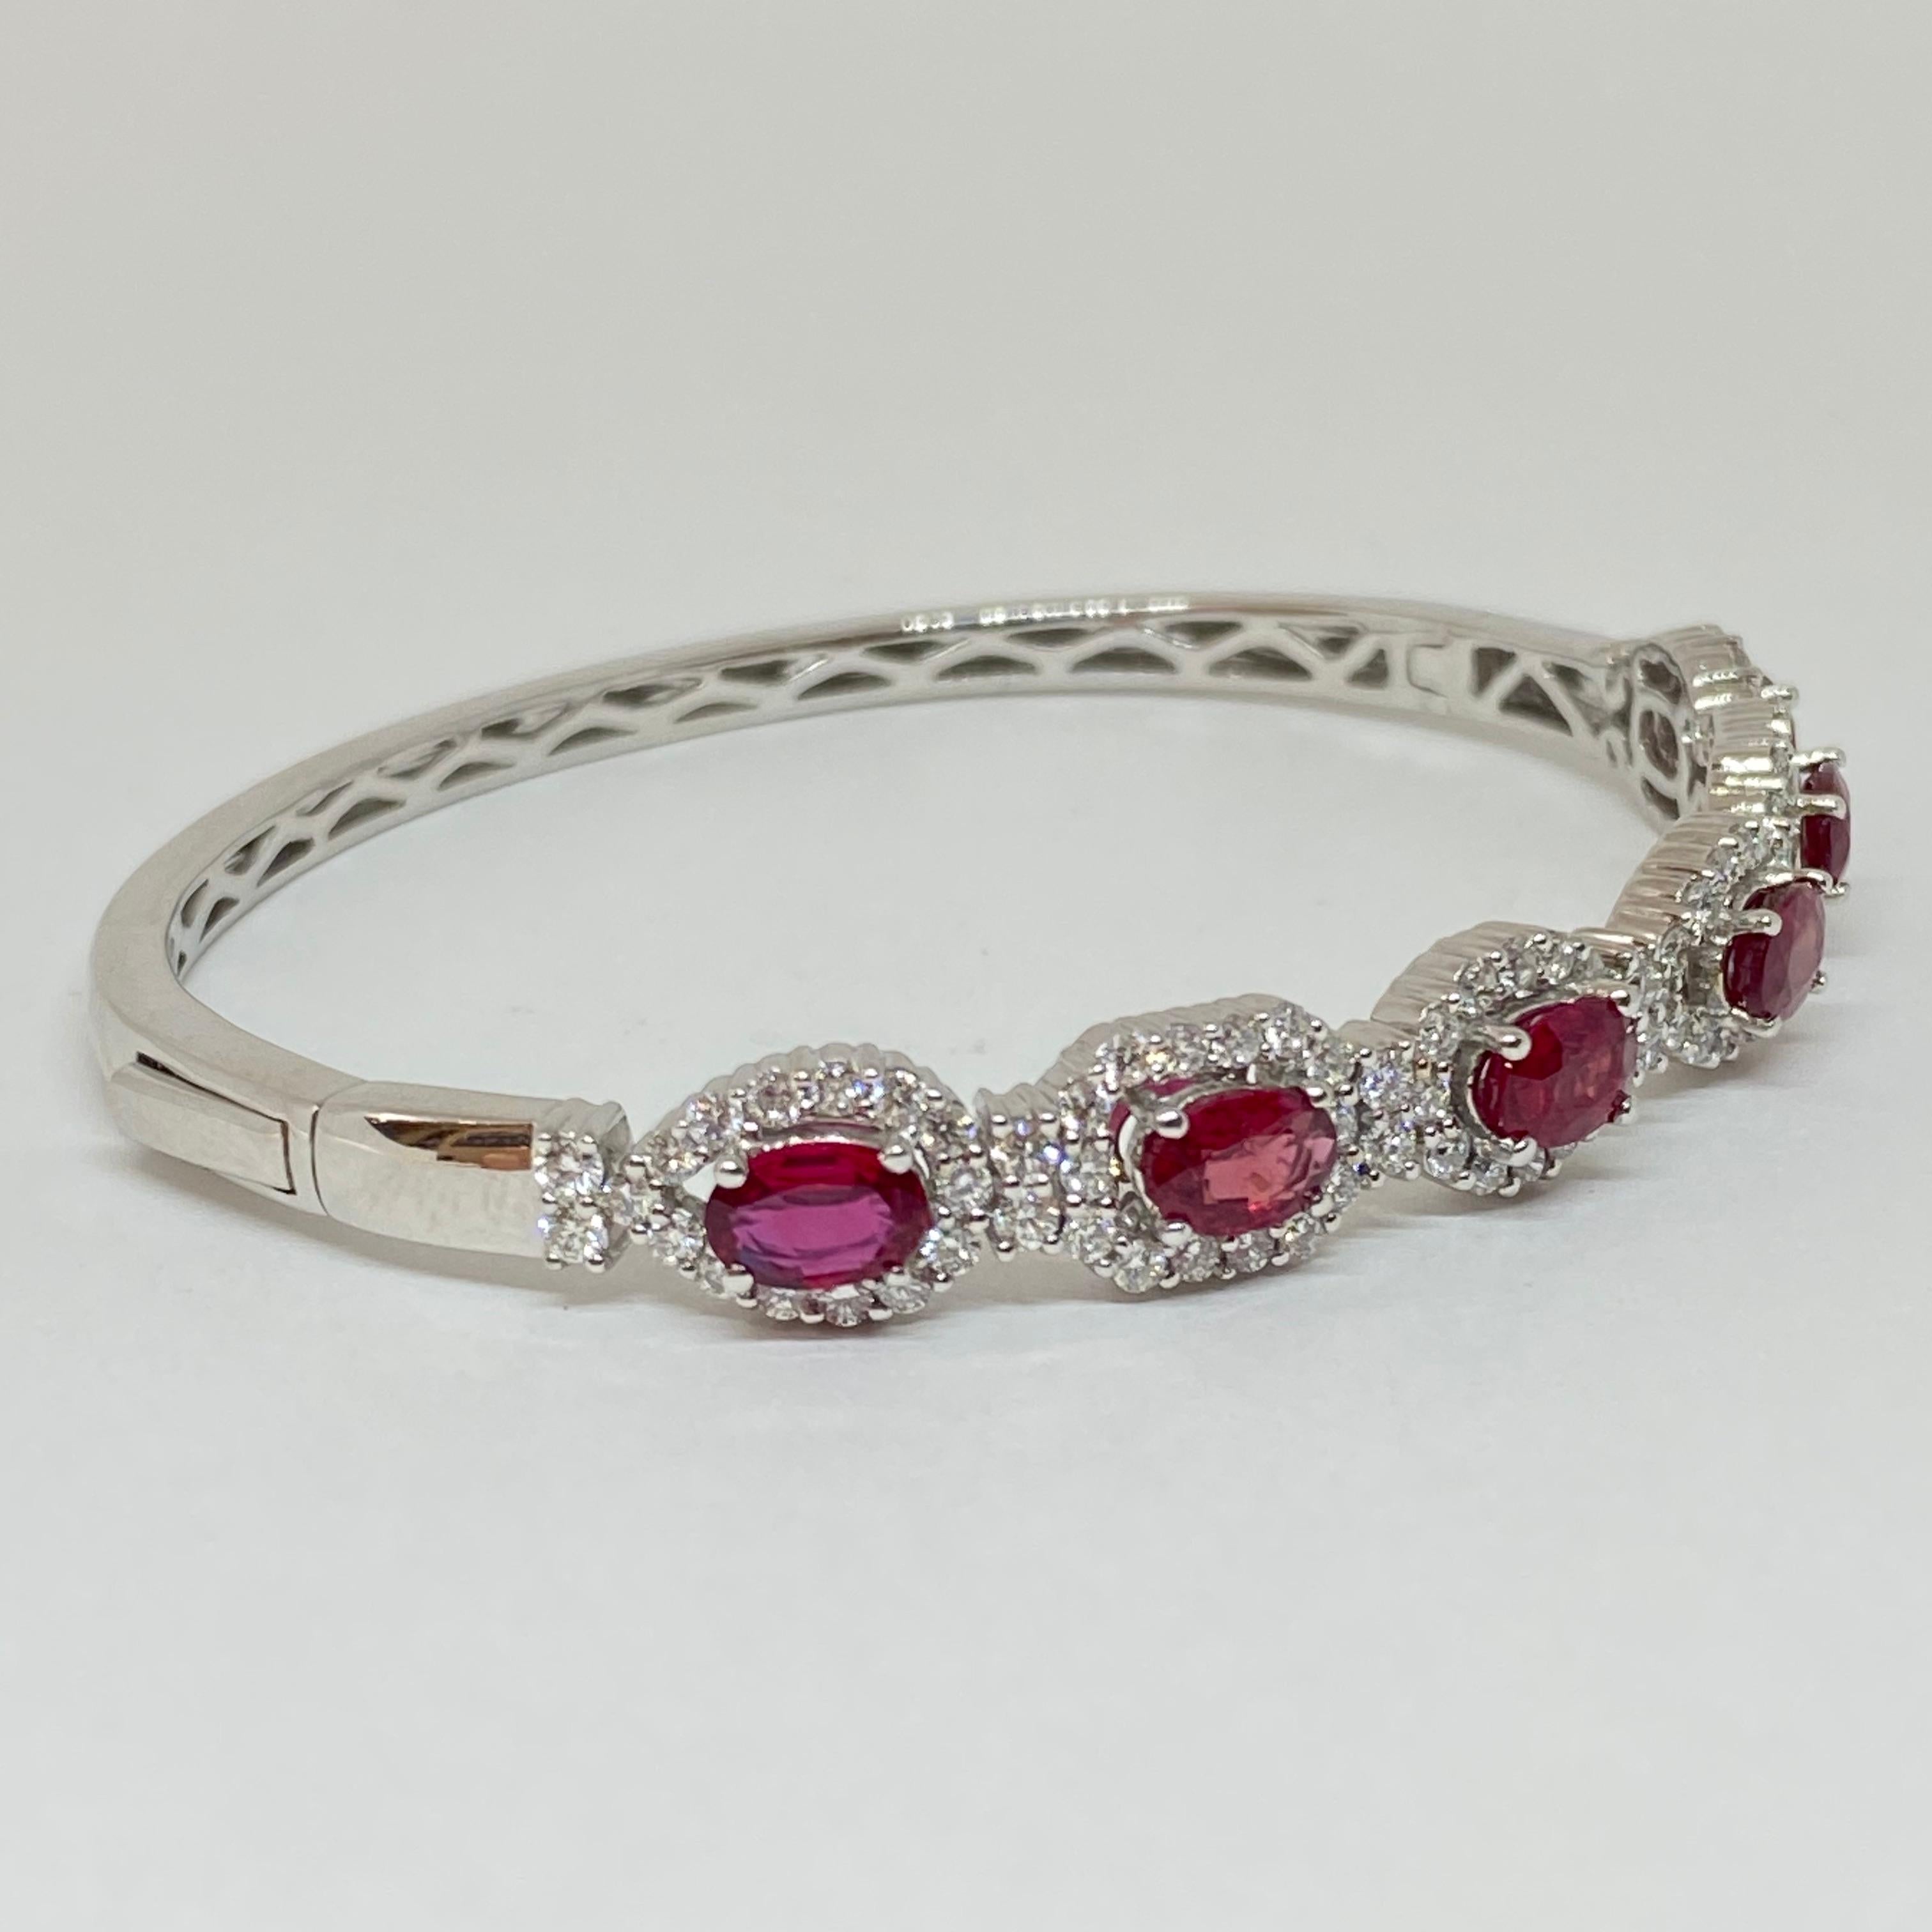 Brand new lovely oval ruby bangle bracelet surrounded by diamond halos, designed in 14 karat white gold. Six vibrant natural oval rubies are set on side with accenting diamonds. Polished white gold bangle with secure button clasp. The rubies have a